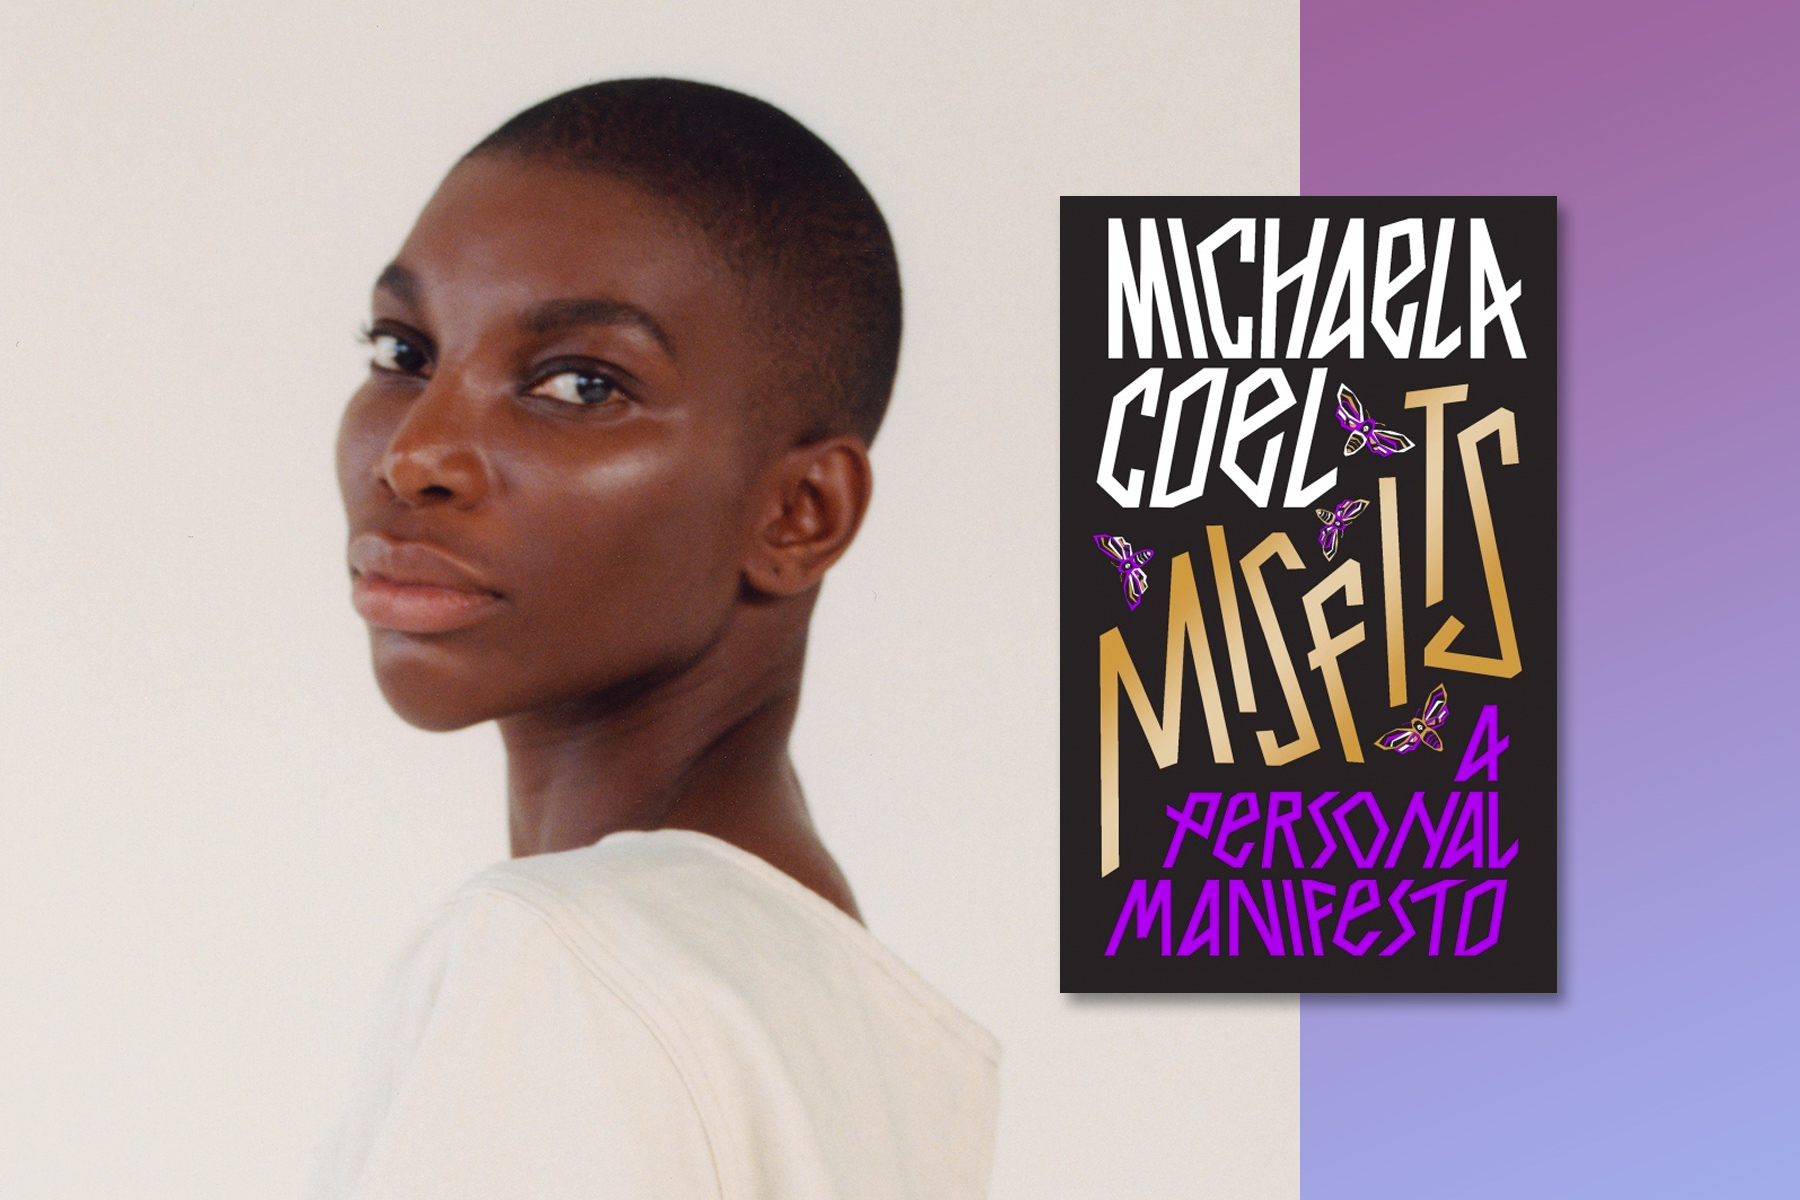 Image of Michaela Coel side by side with a copy of her book Misfits